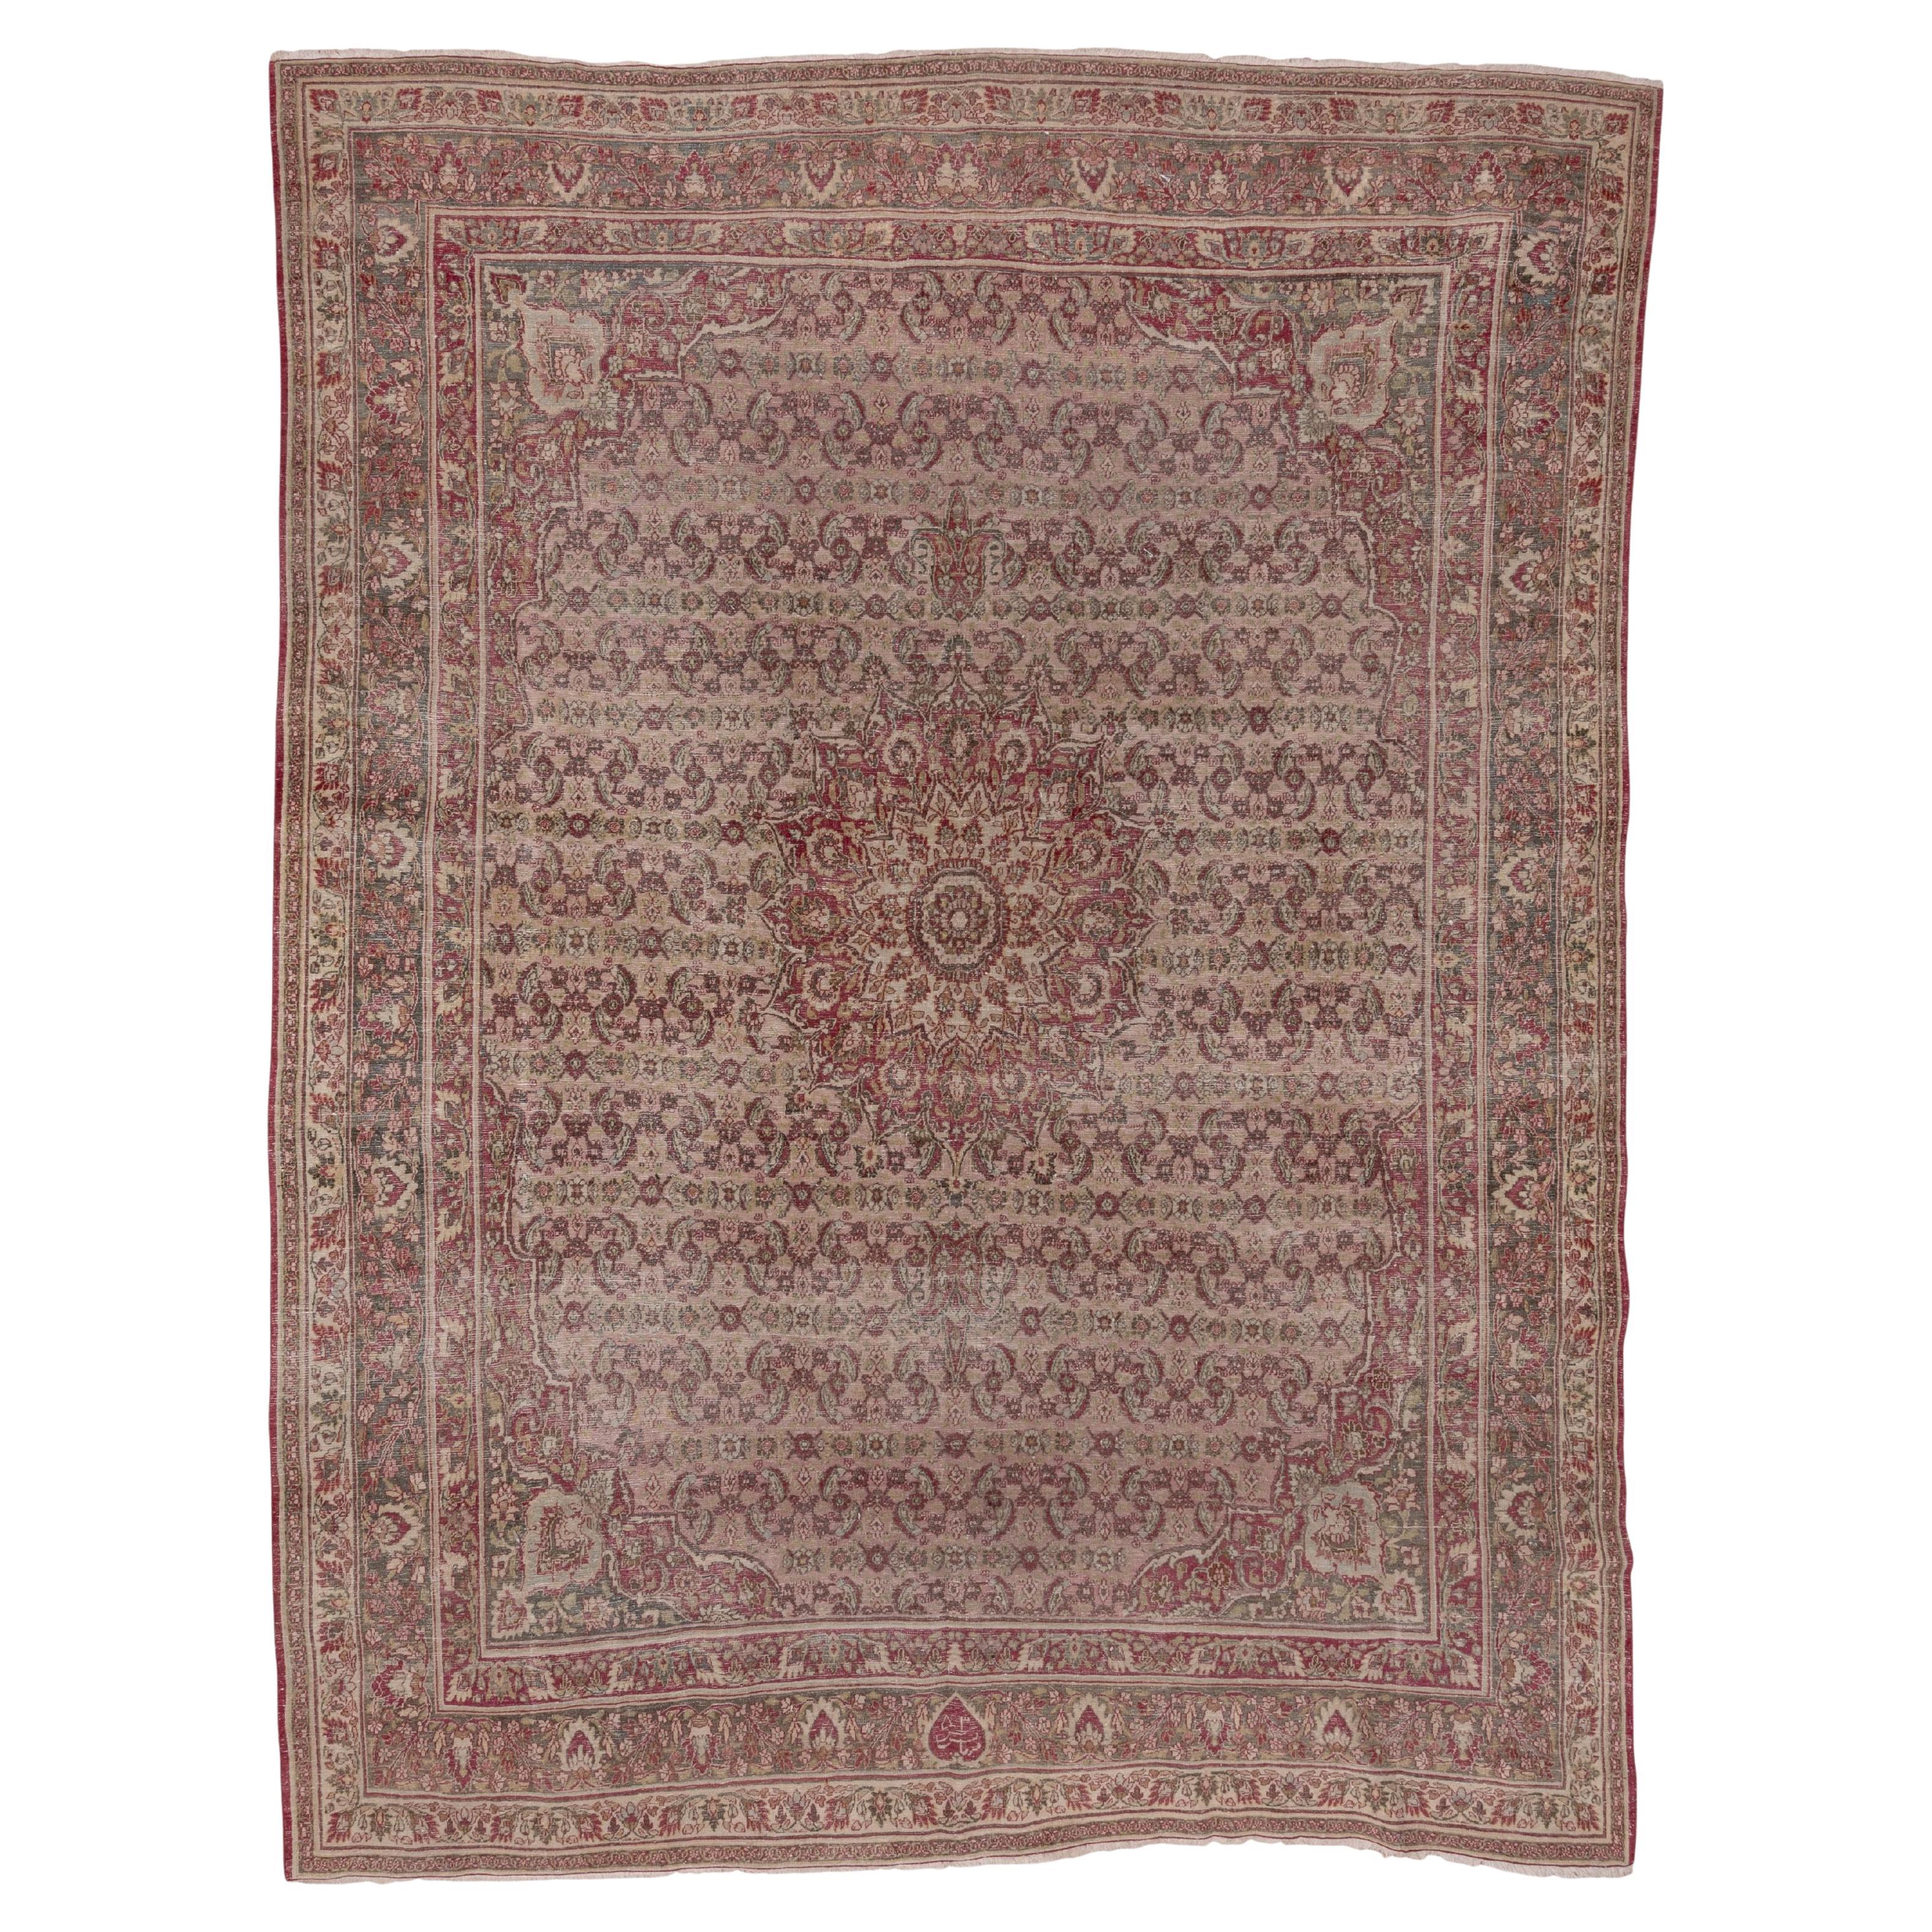 Antique Persian Khorassan Rug, Dusty Pink Field, Wine, Citron & Green Accents For Sale